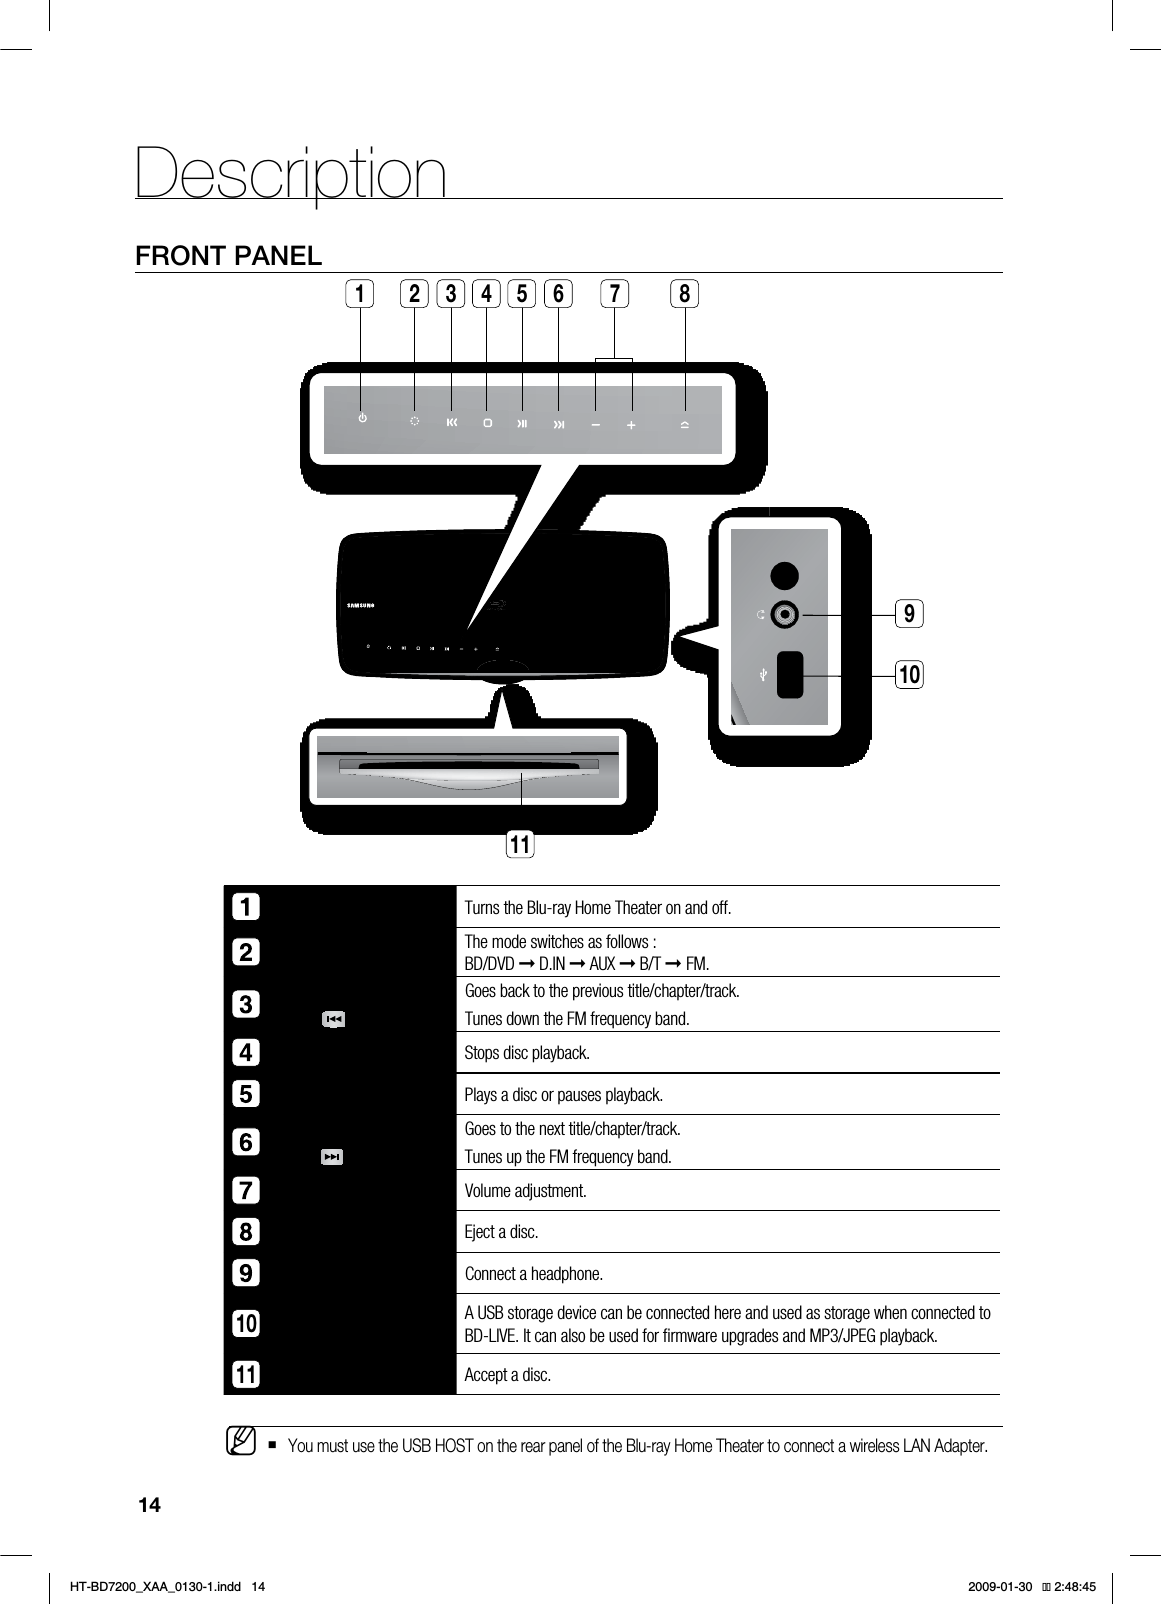 14DescriptionFRONT PANELPOWER BUTTON Turns the Blu-ray Home Theater on and off. FUNCTION BUTTON The mode switches as follows : BD/DVD ➞ D.IN ➞ AUX ➞ B/T ➞ FM.TUNING DOWN &amp; SKIP() BUTTONGoes back to the previous title/chapter/track.Tunes down the FM frequency band.STOP BUTTON Stops disc playback.PLAY/PAUSE BUTTON Plays a disc or pauses playback.TUNING UP &amp; SKIP() BUTTONGoes to the next title/chapter/track.Tunes up the FM frequency band.Volume Control BUTTON Volume adjustment.EJECT BUTTON Eject a disc.HEADPHONE JACKConnect a headphone.10USB HOST A USB storage device can be connected here and used as storage when connected to BD-LIVE. It can also be used for ﬁ rmware upgrades and MP3/JPEG playback.11DISC SLOT Accept a disc.You must use the USB HOST on the rear panel of the Blu-ray Home Theater to connect a wireless LAN Adapter.M111 2 3 4 5 6 87910*6$&amp;A:##AKPFF 